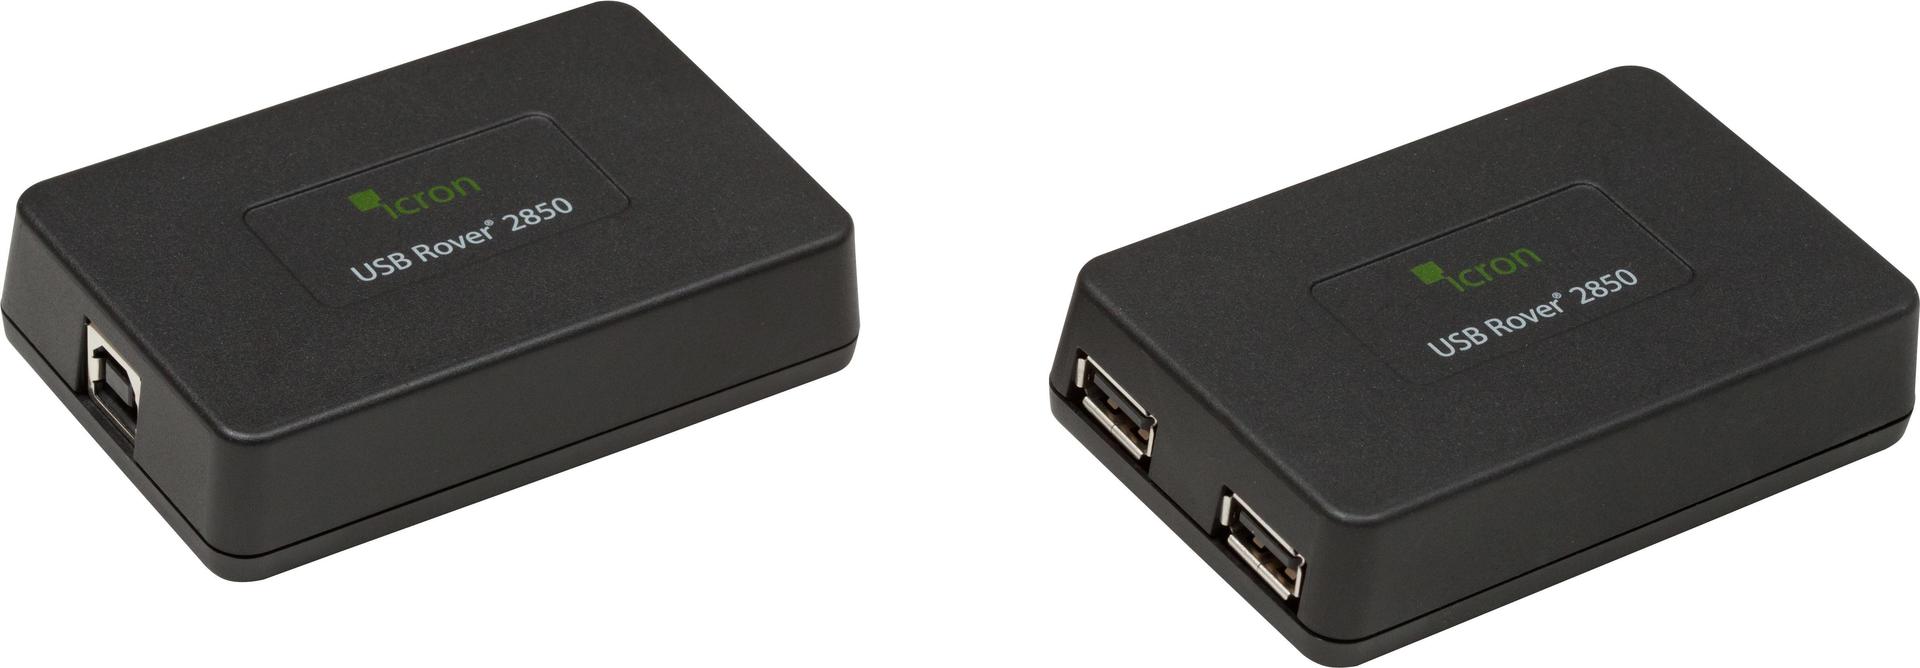 Icron 00-00312 USB Rover 2850 2-port USB 1.1 extender set. Max. extension distance: 85 m Usb rover 2850 (00-00312)